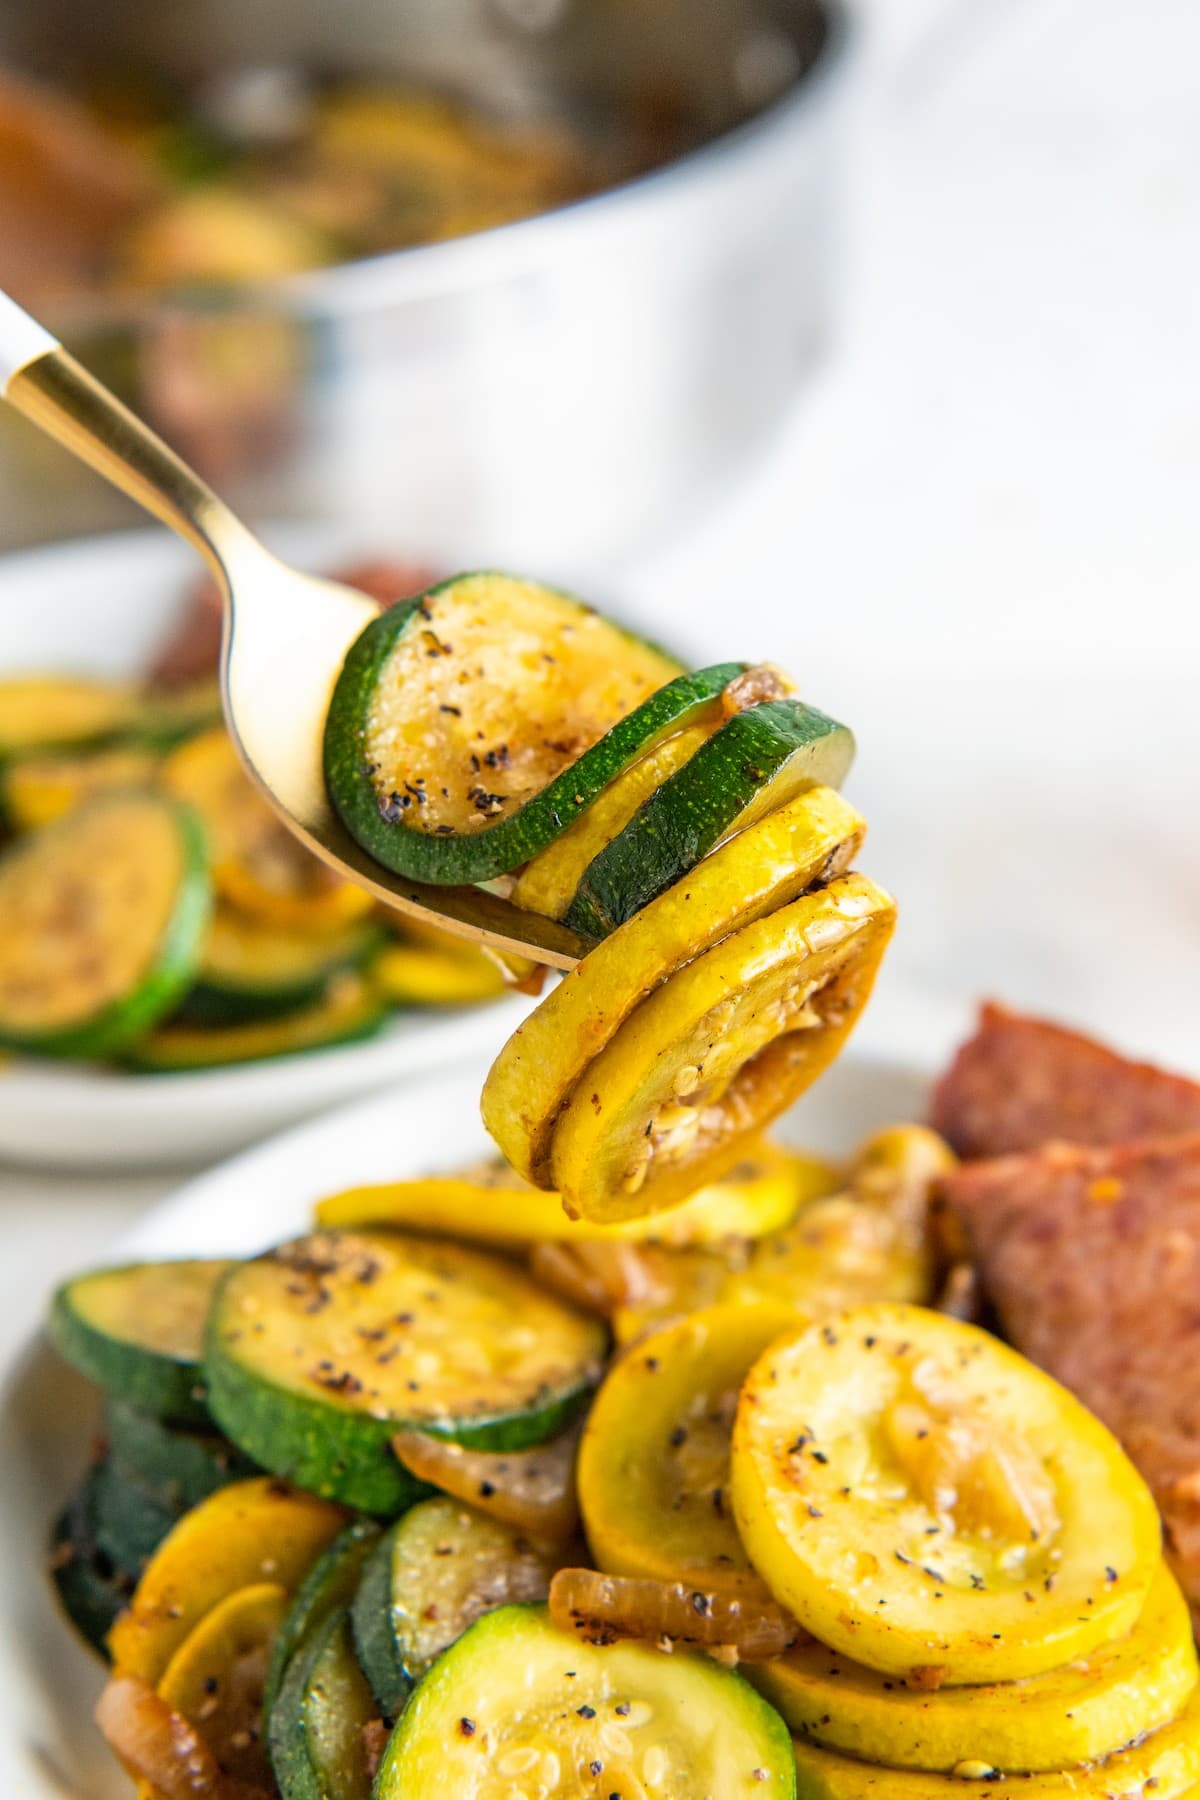 Sautéed zucchini and squash on a fork, above a plate full of squash, zucchini, and sausage